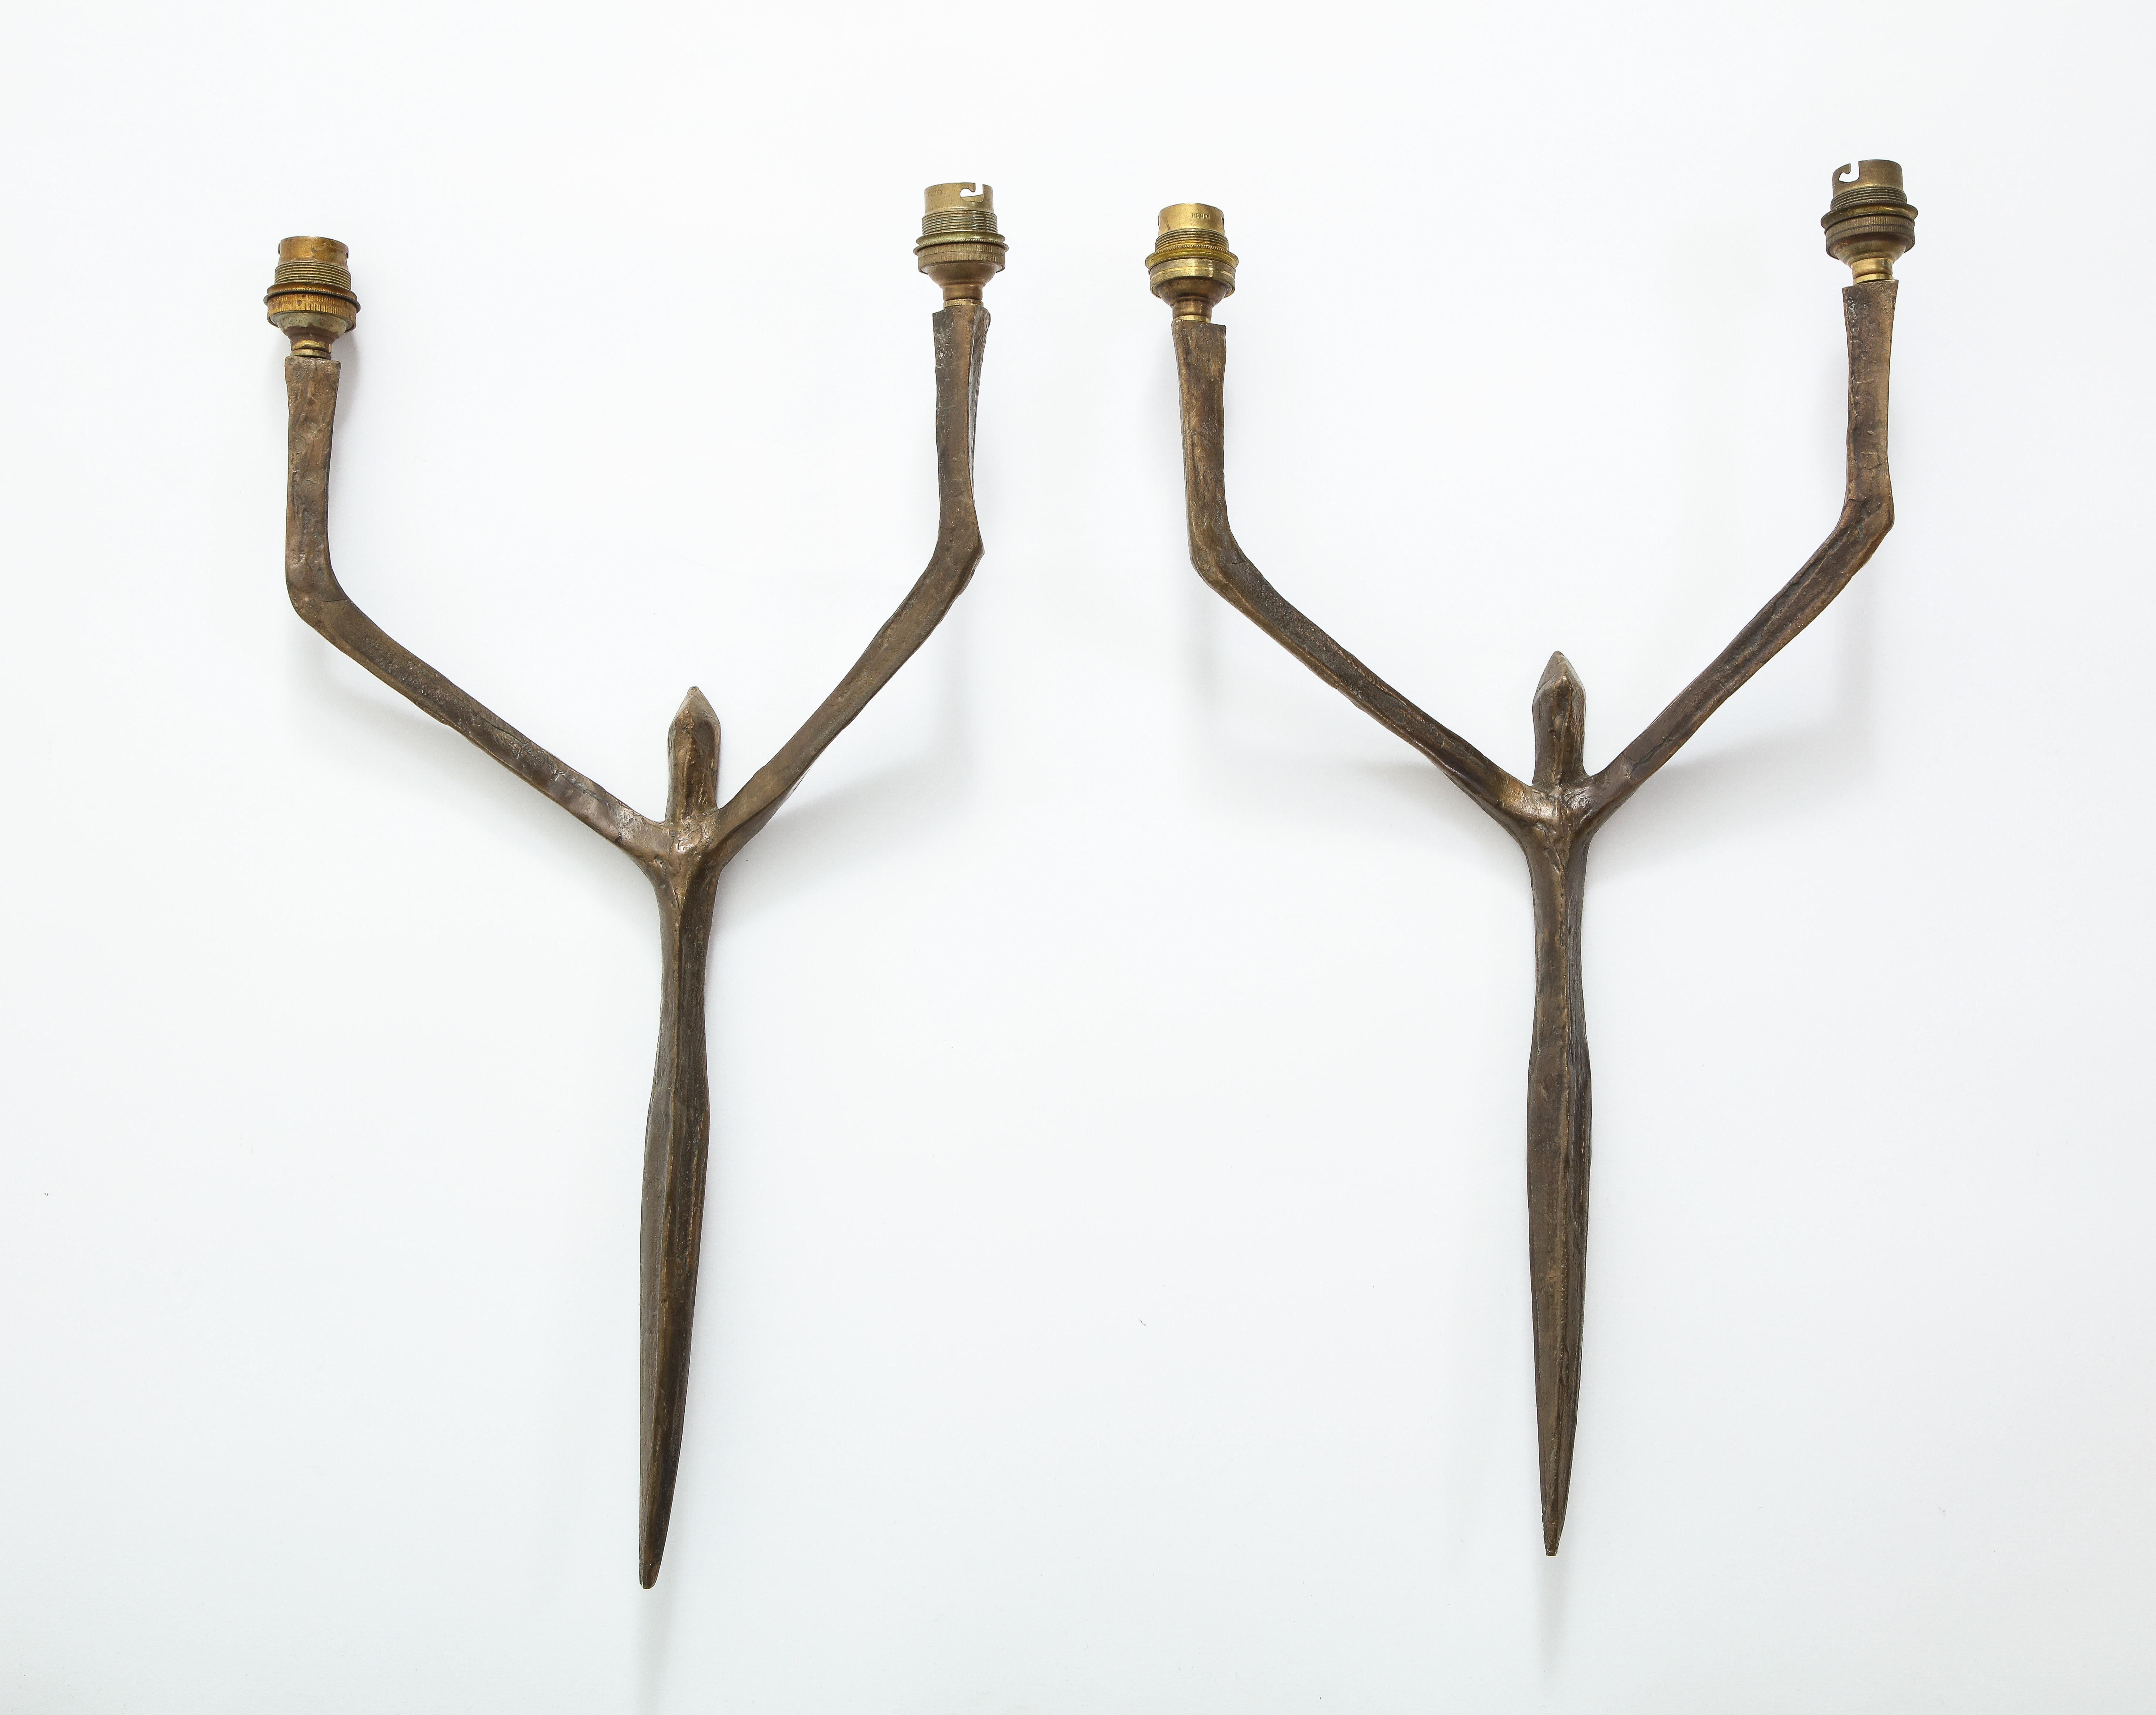 Pair of patinated bronze male caryatides sconces by Felix Agostini, France, 1960.

Back plates not included. Rewire required. 

 